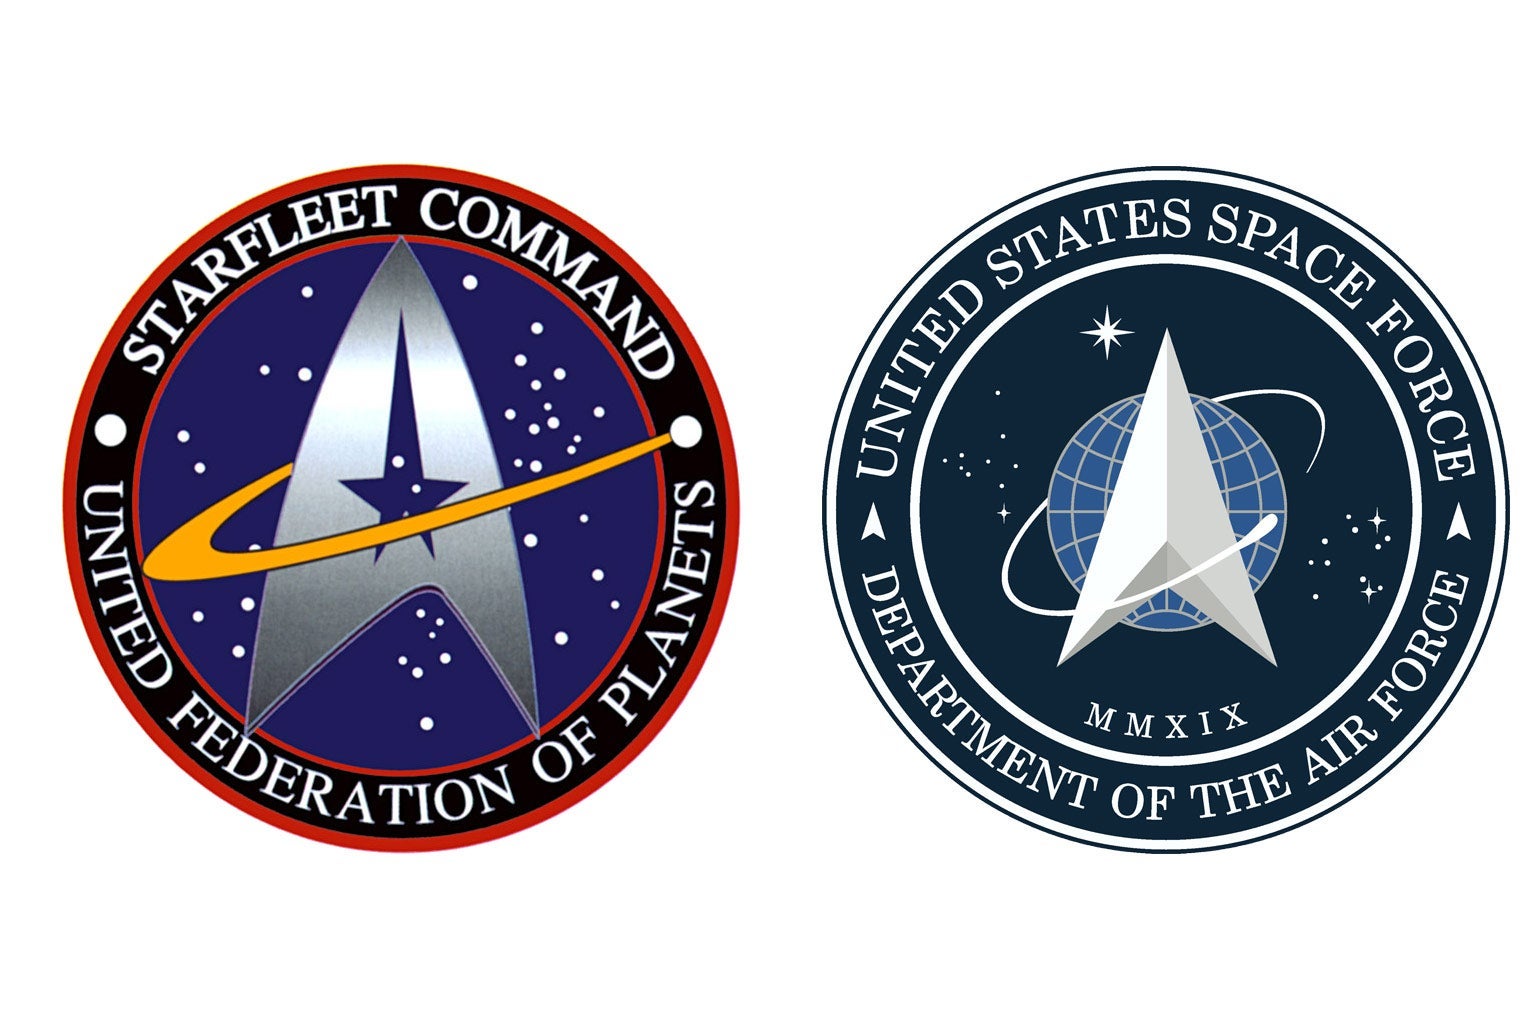 On the left: a circular logo with an arrowhead-shaped symbol with a star through the middle. in the middle labeled "Starfleet Command. United Federation of Planets." On the right: a similar-looking logo, but without the star, and there is a blue circle behind the arrowhead shaped symbol. It is labeled "United States Space Force. Department of the Air Force."